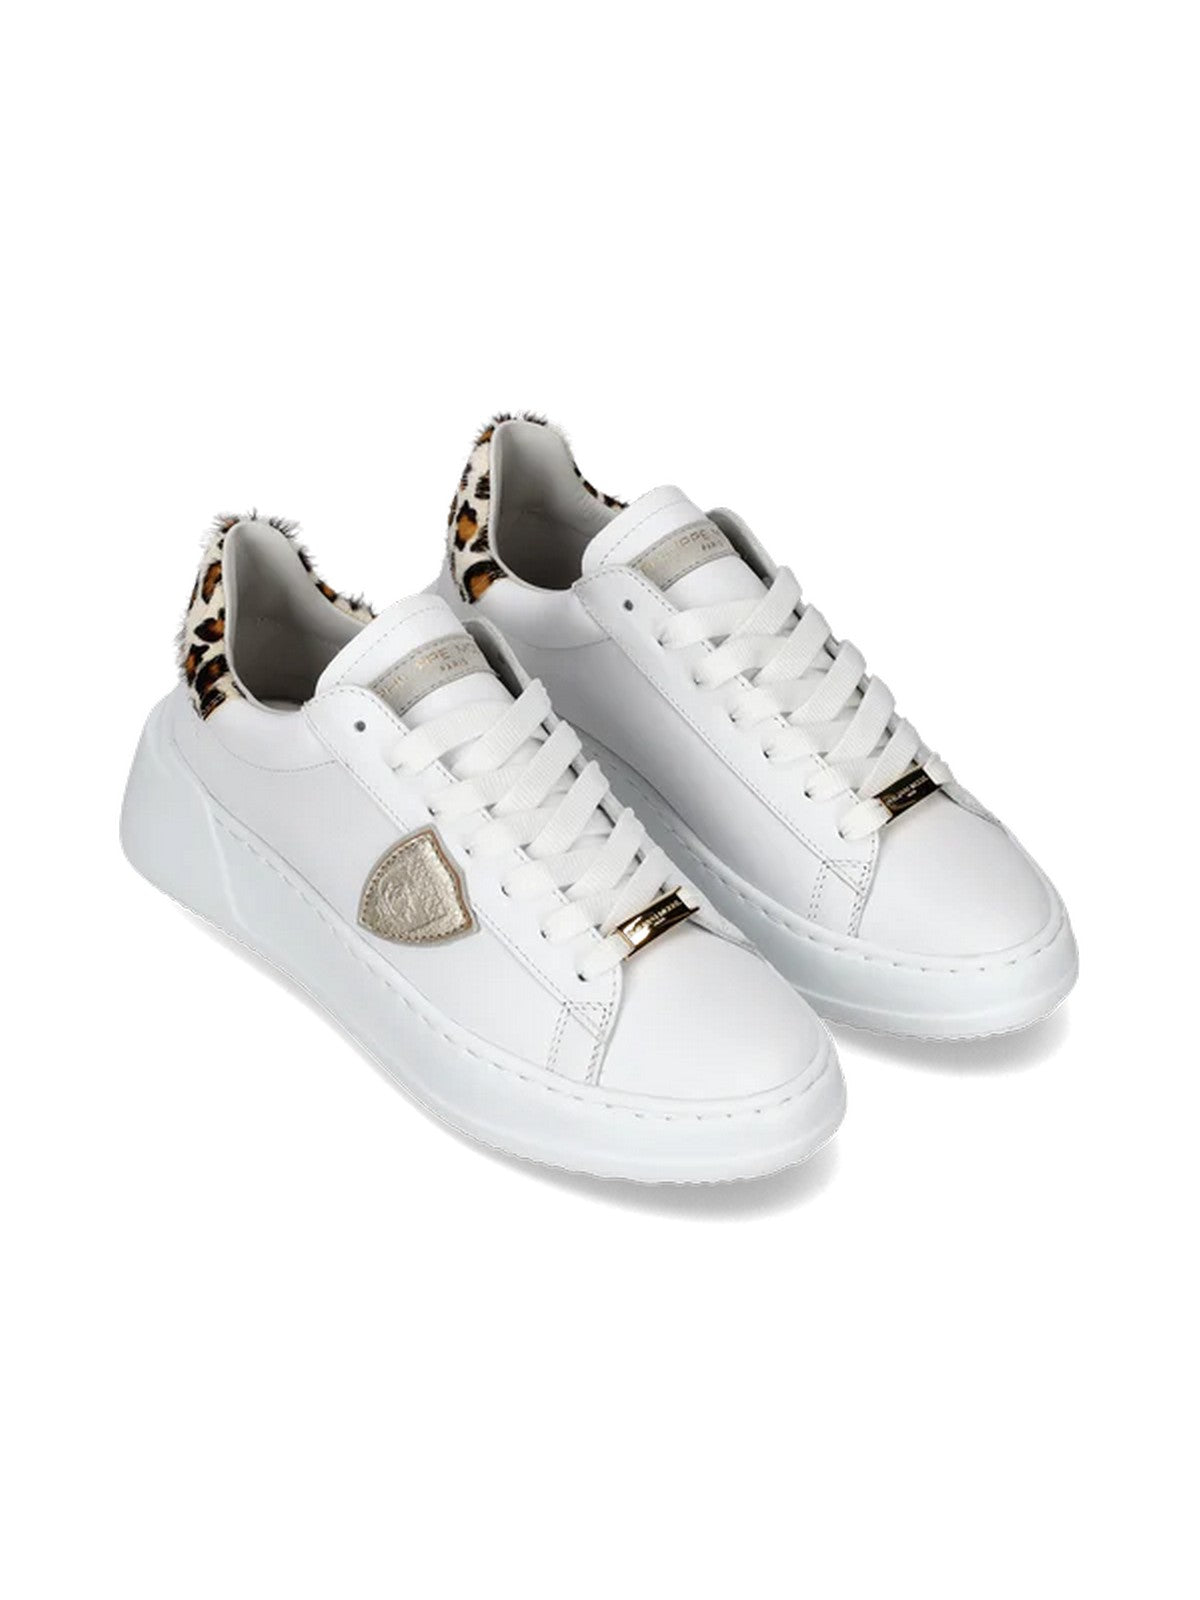 PHILIPPE MODEL Sneaker Donna Tres temple low woman BJLD VA01 Bianco